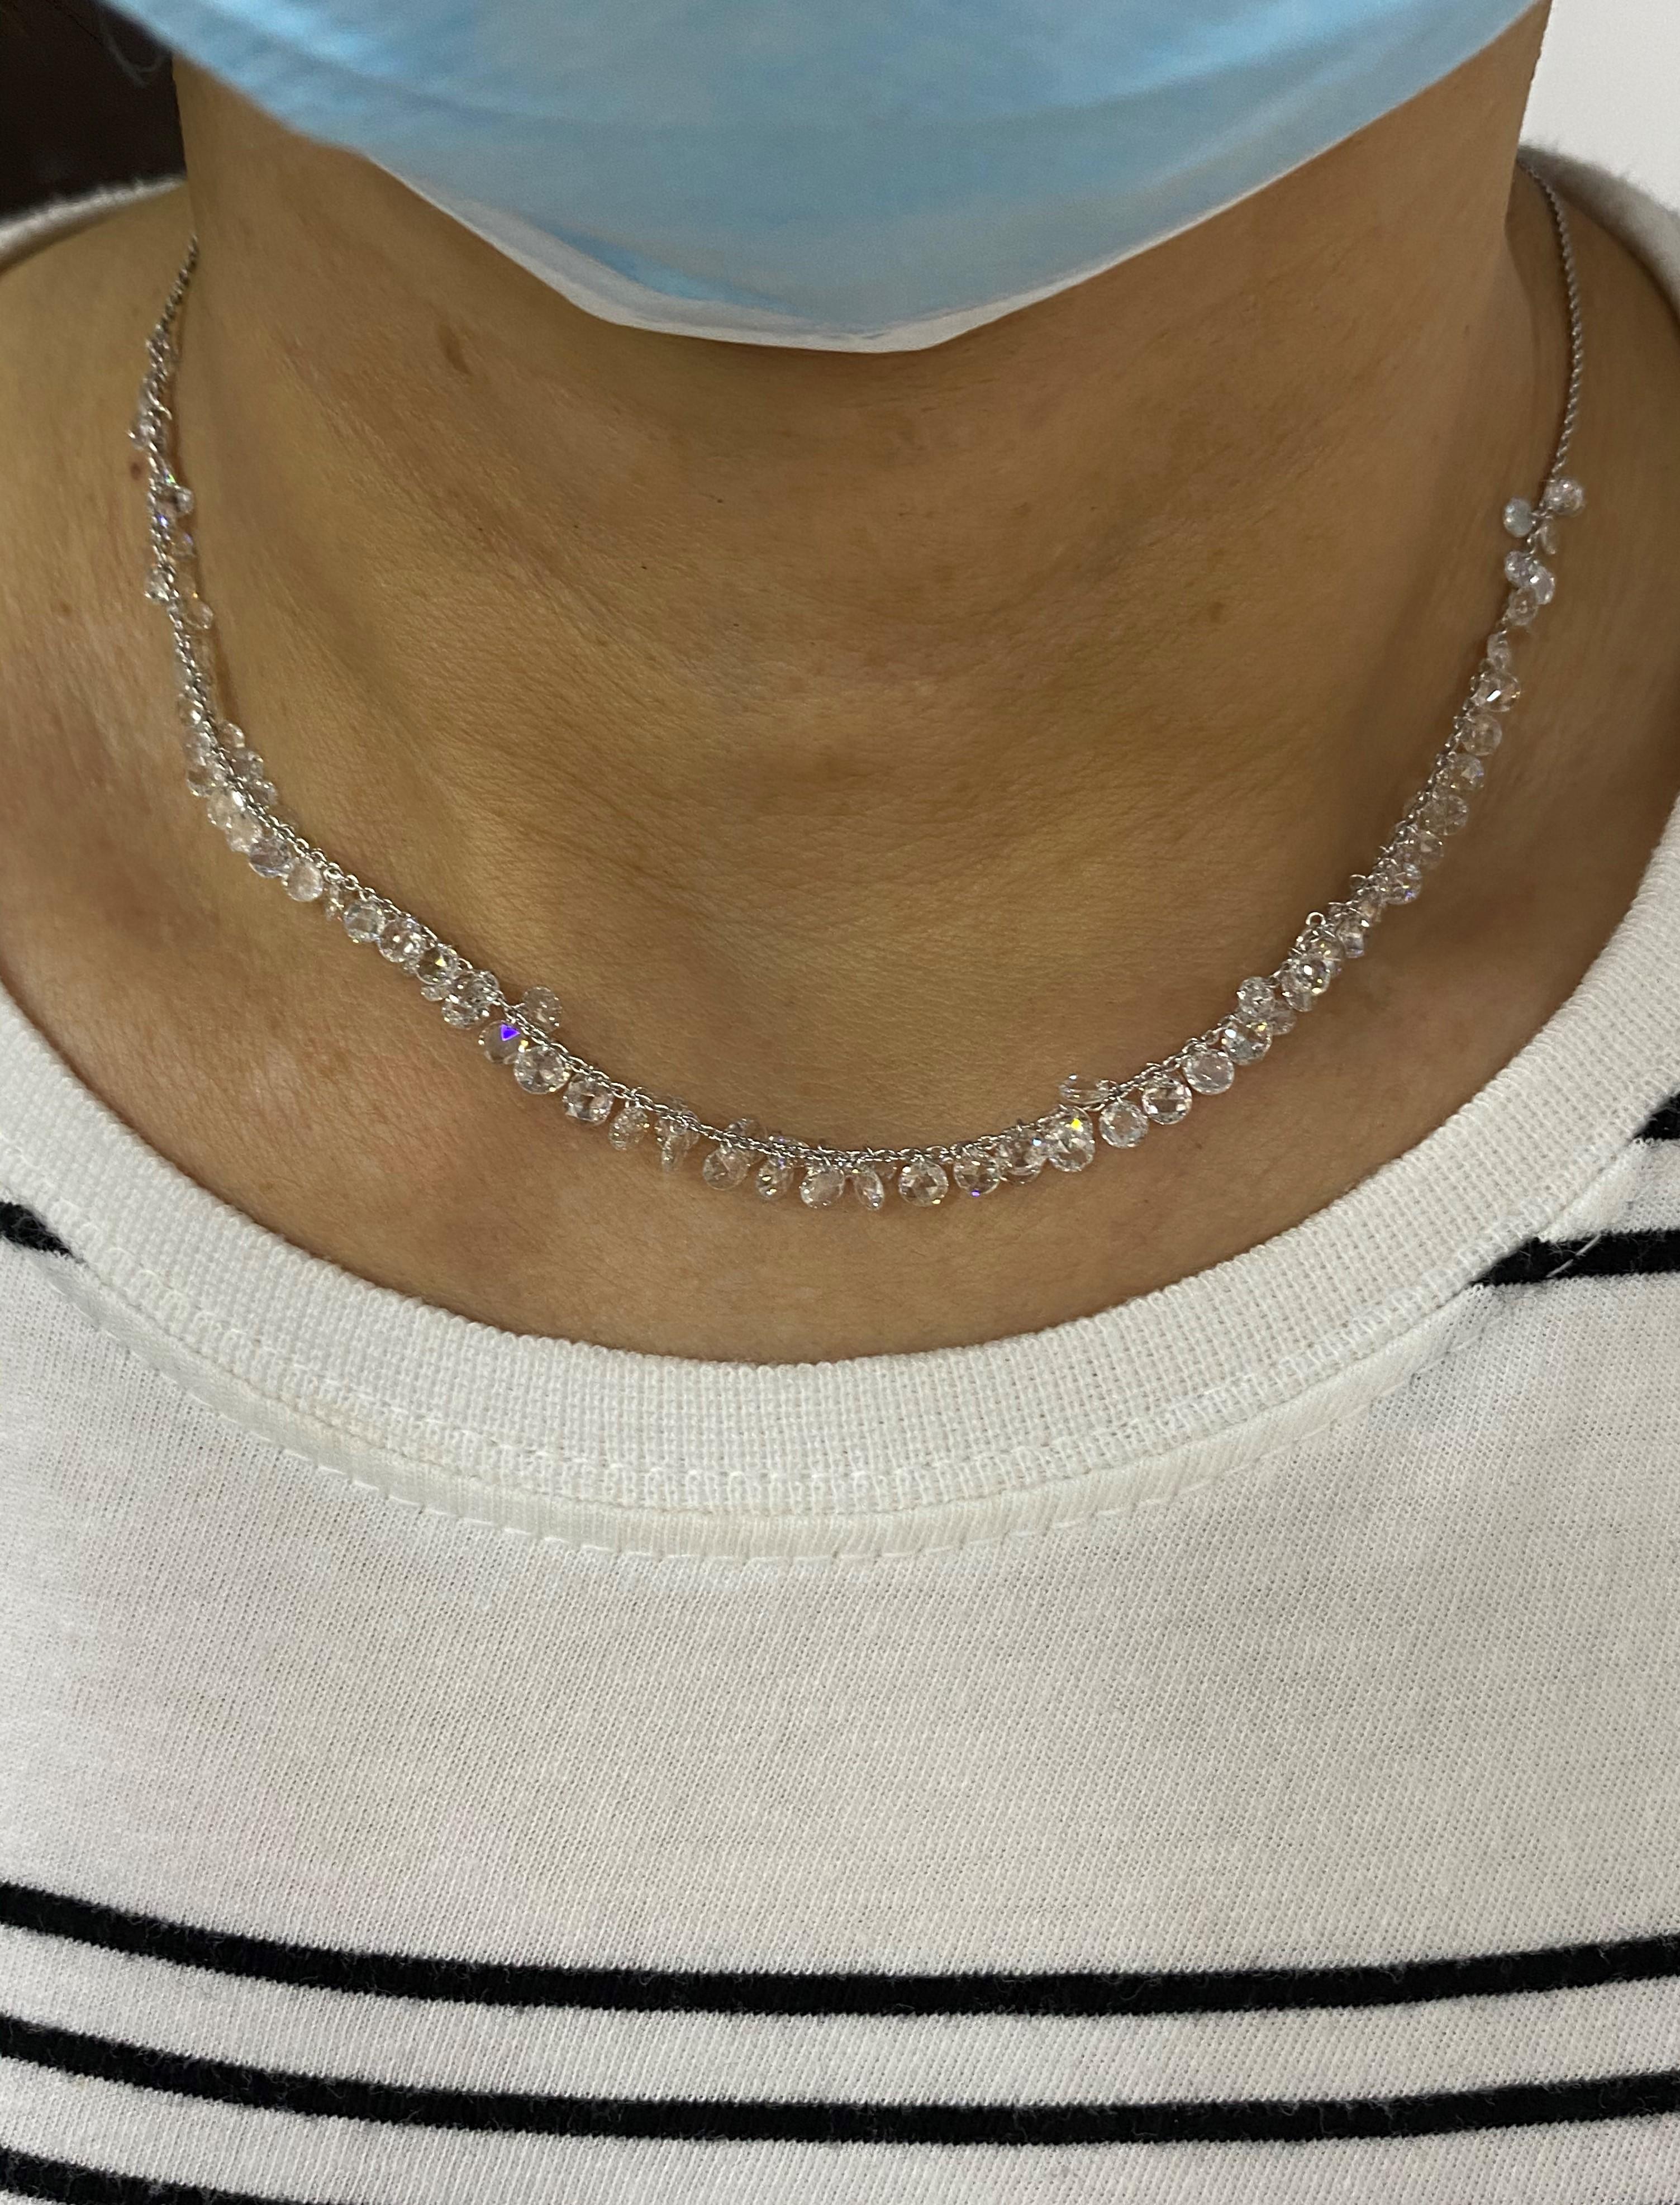 JR 6.05 Carat Rose Cut Floral Dangling Necklace 18 Karat White Gold

This contemporary piece of necklace is made of Drilled Rose cut diamond and it eludes femininity & grace. Diamond Rose Cut Floral Dangling Necklace can be adjust the length from 16